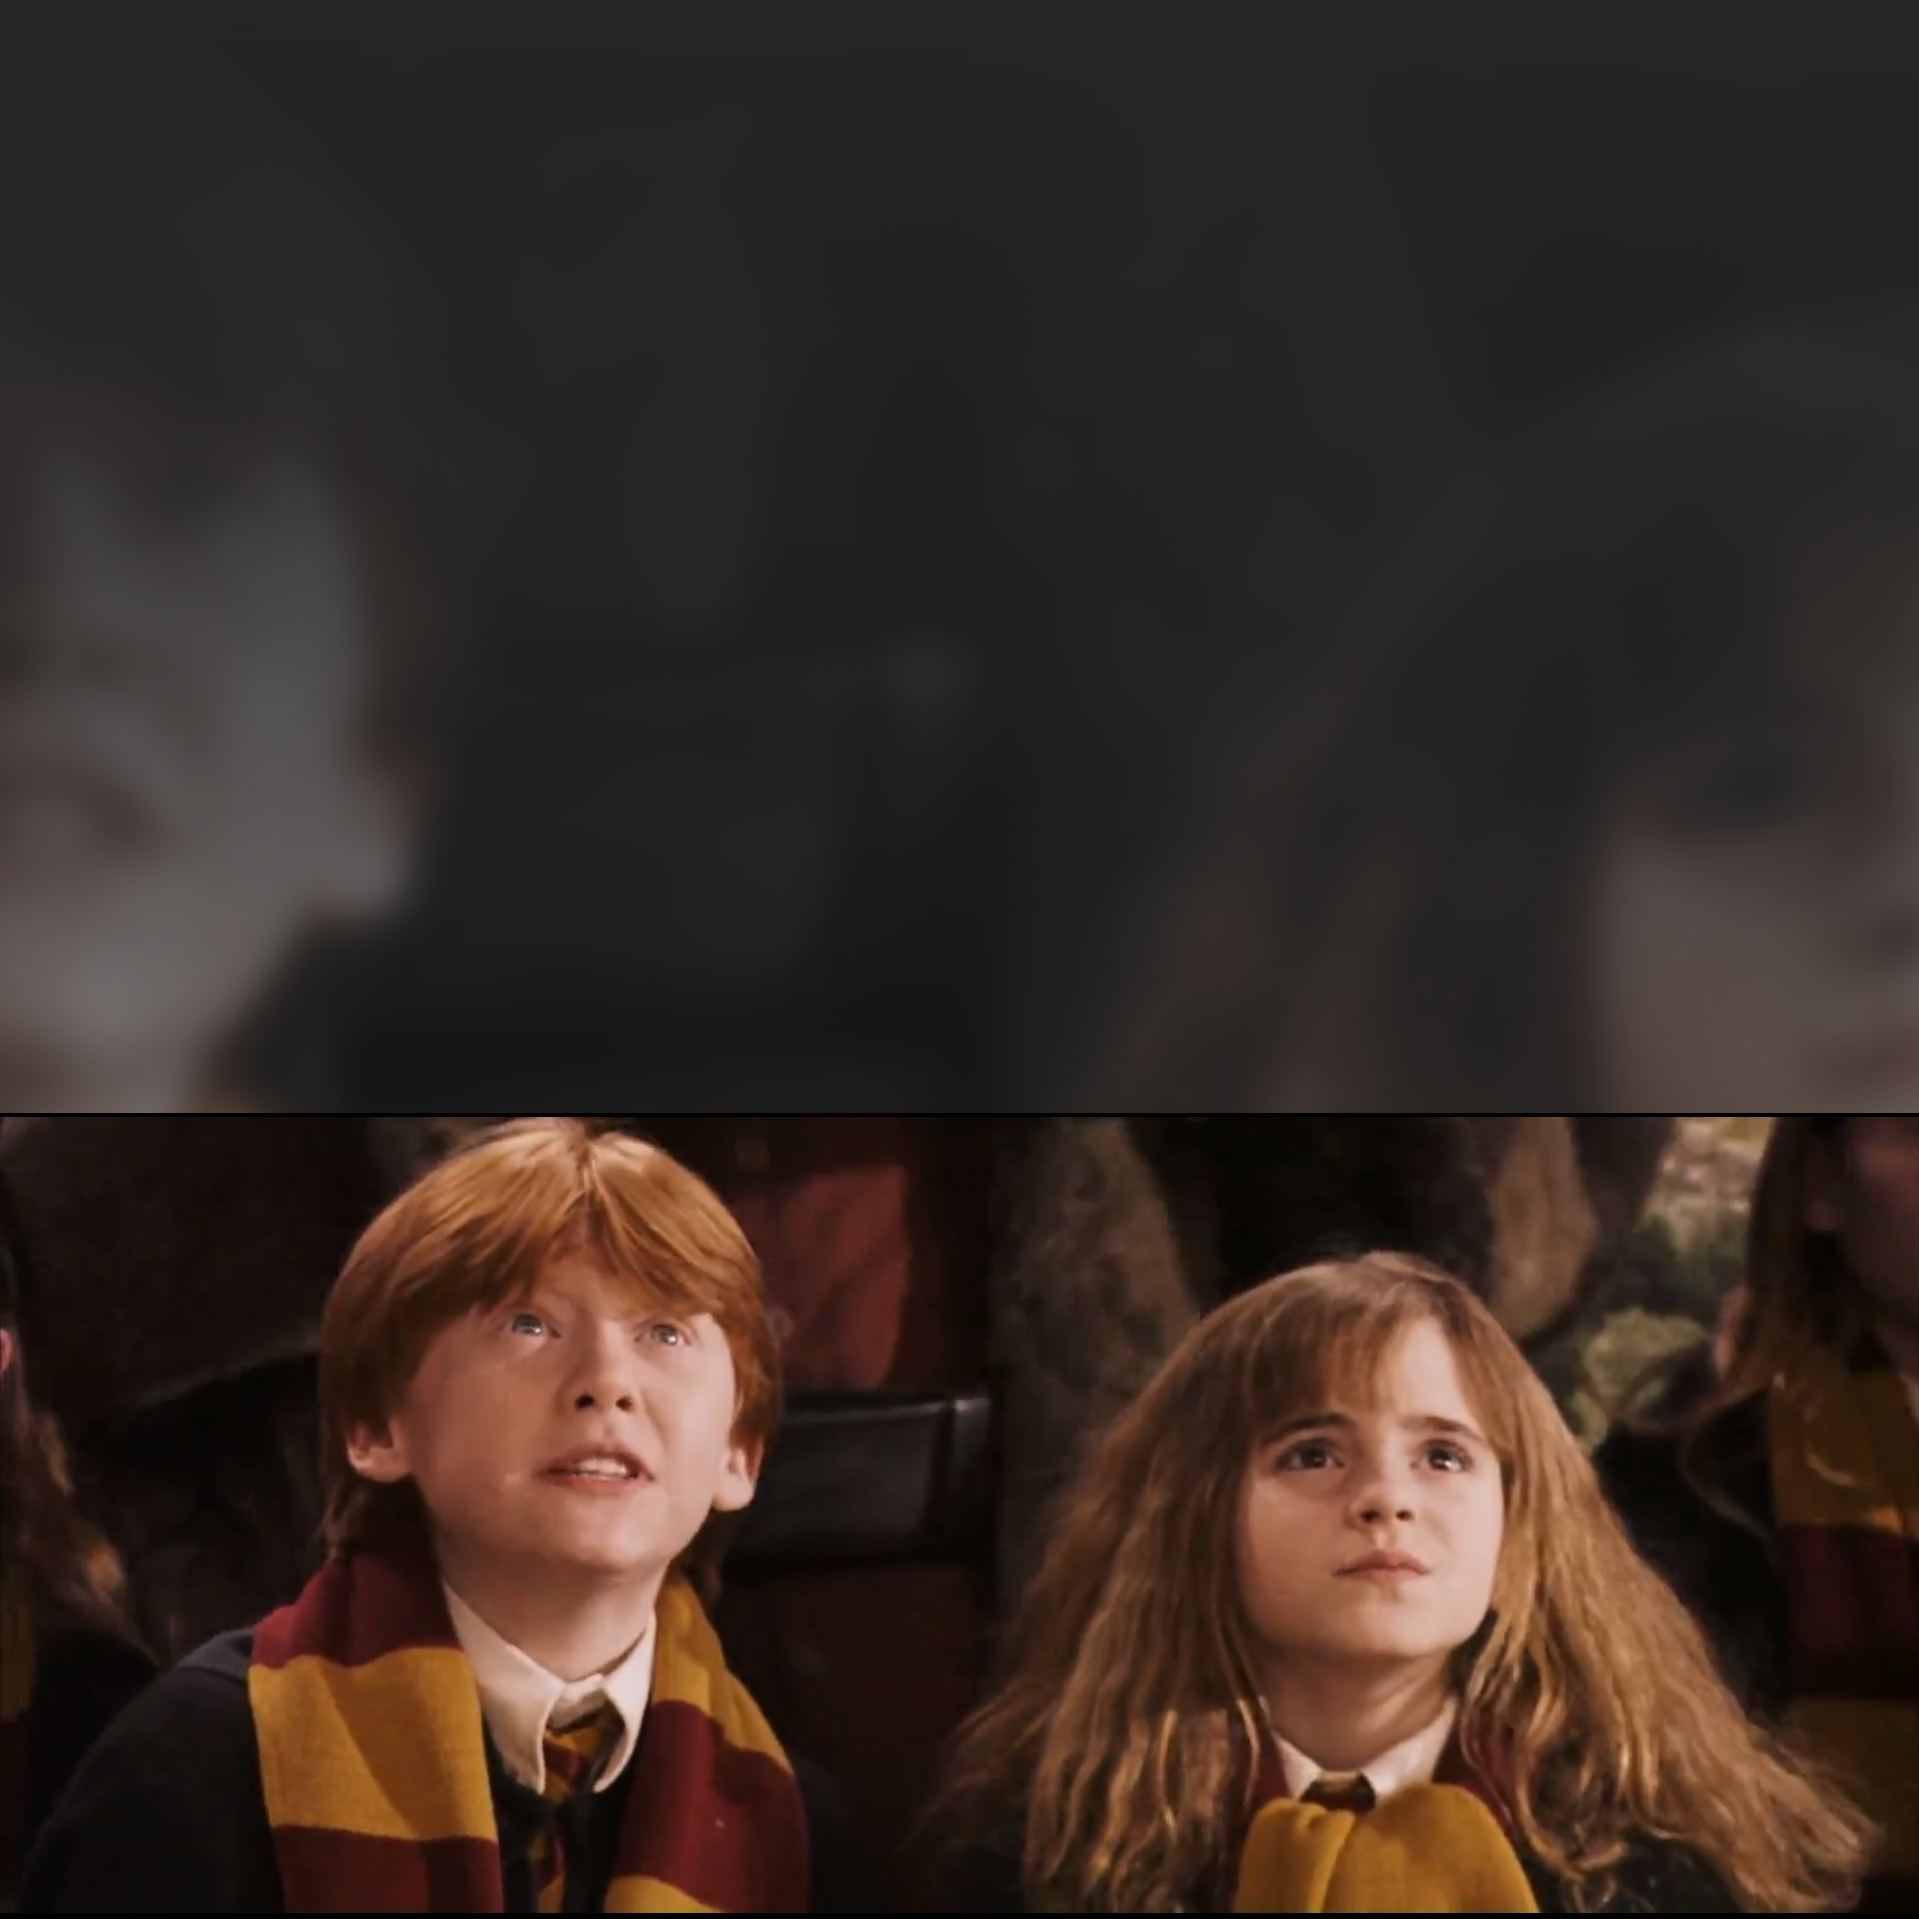 High Quality Hermione and Ron perspective (Harry Potter) Blank Meme Template